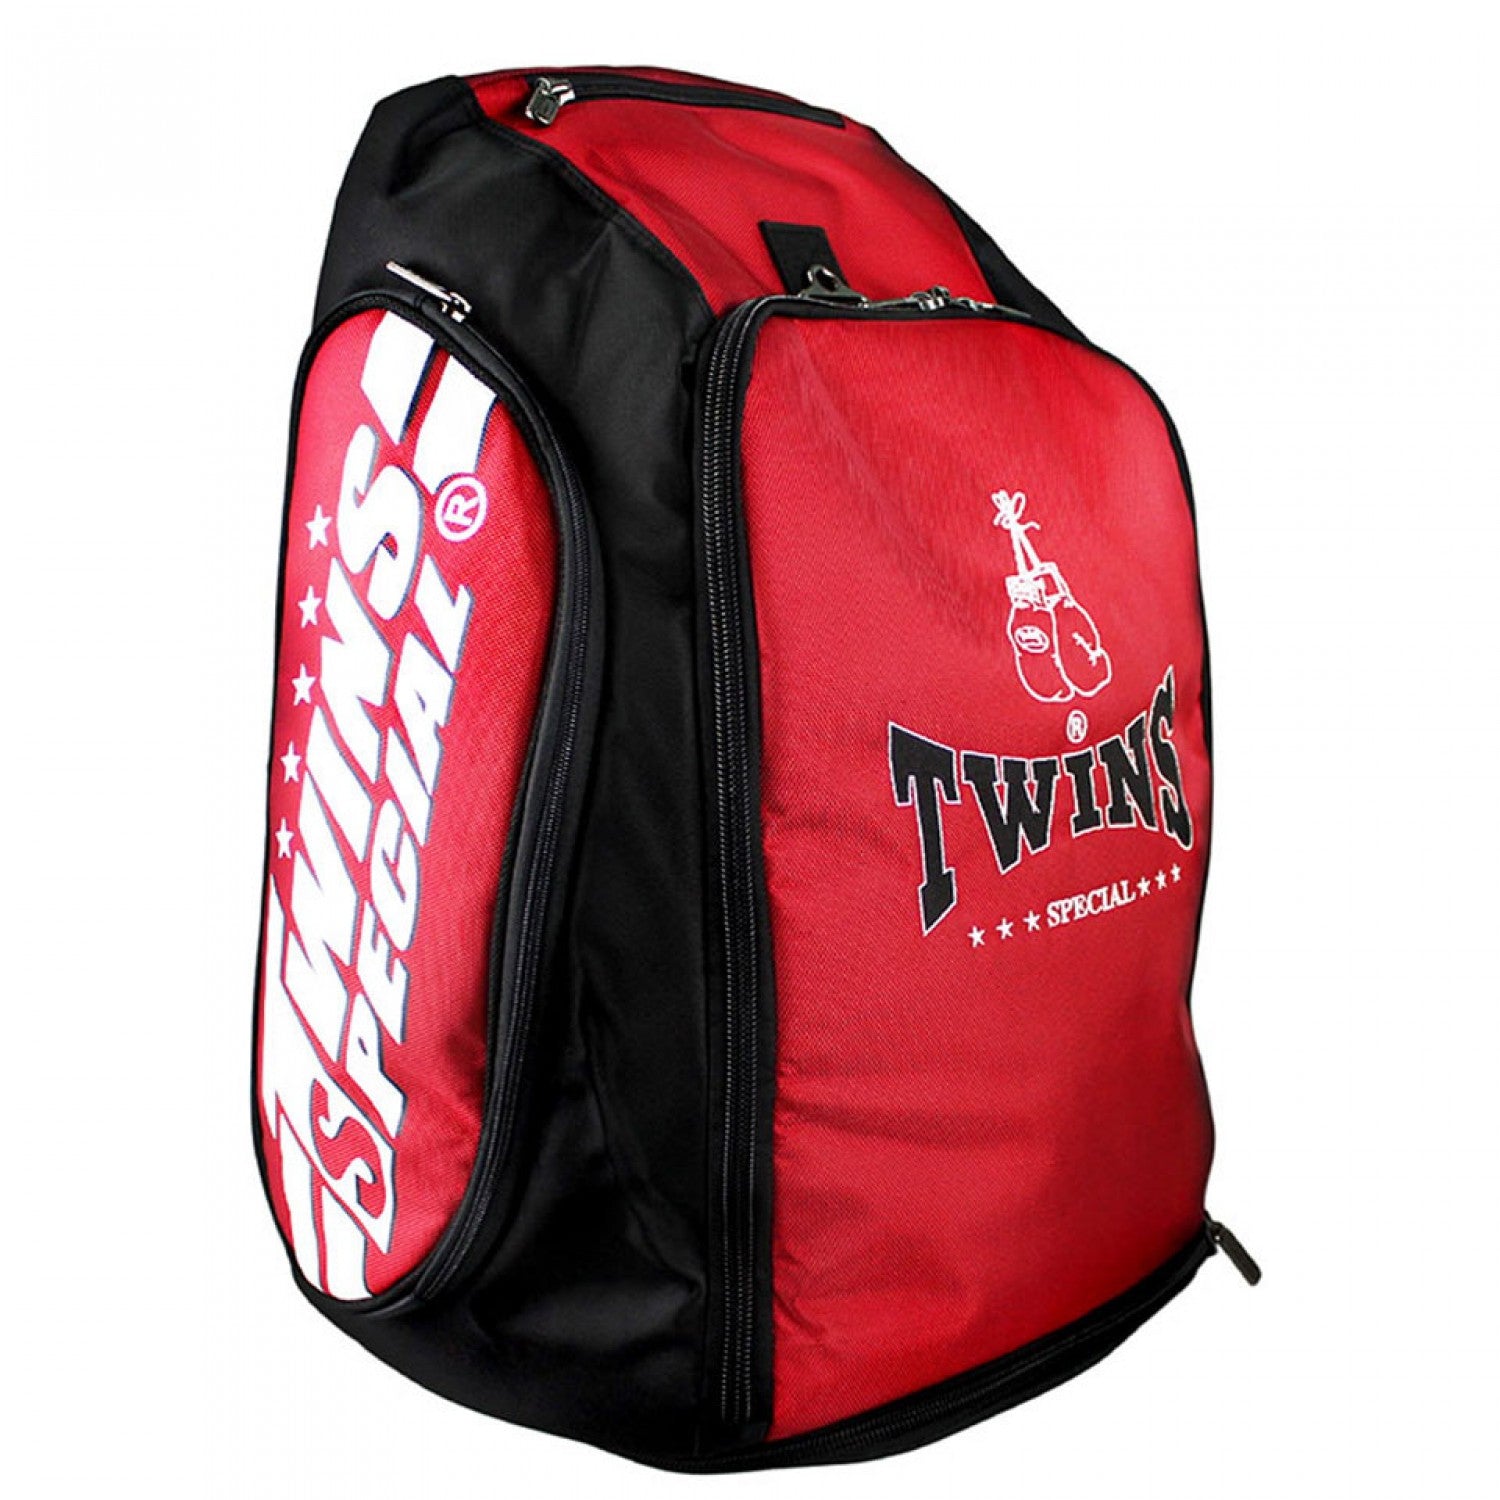 Twins Special Convertible/Expandable Backpack - BAG-5